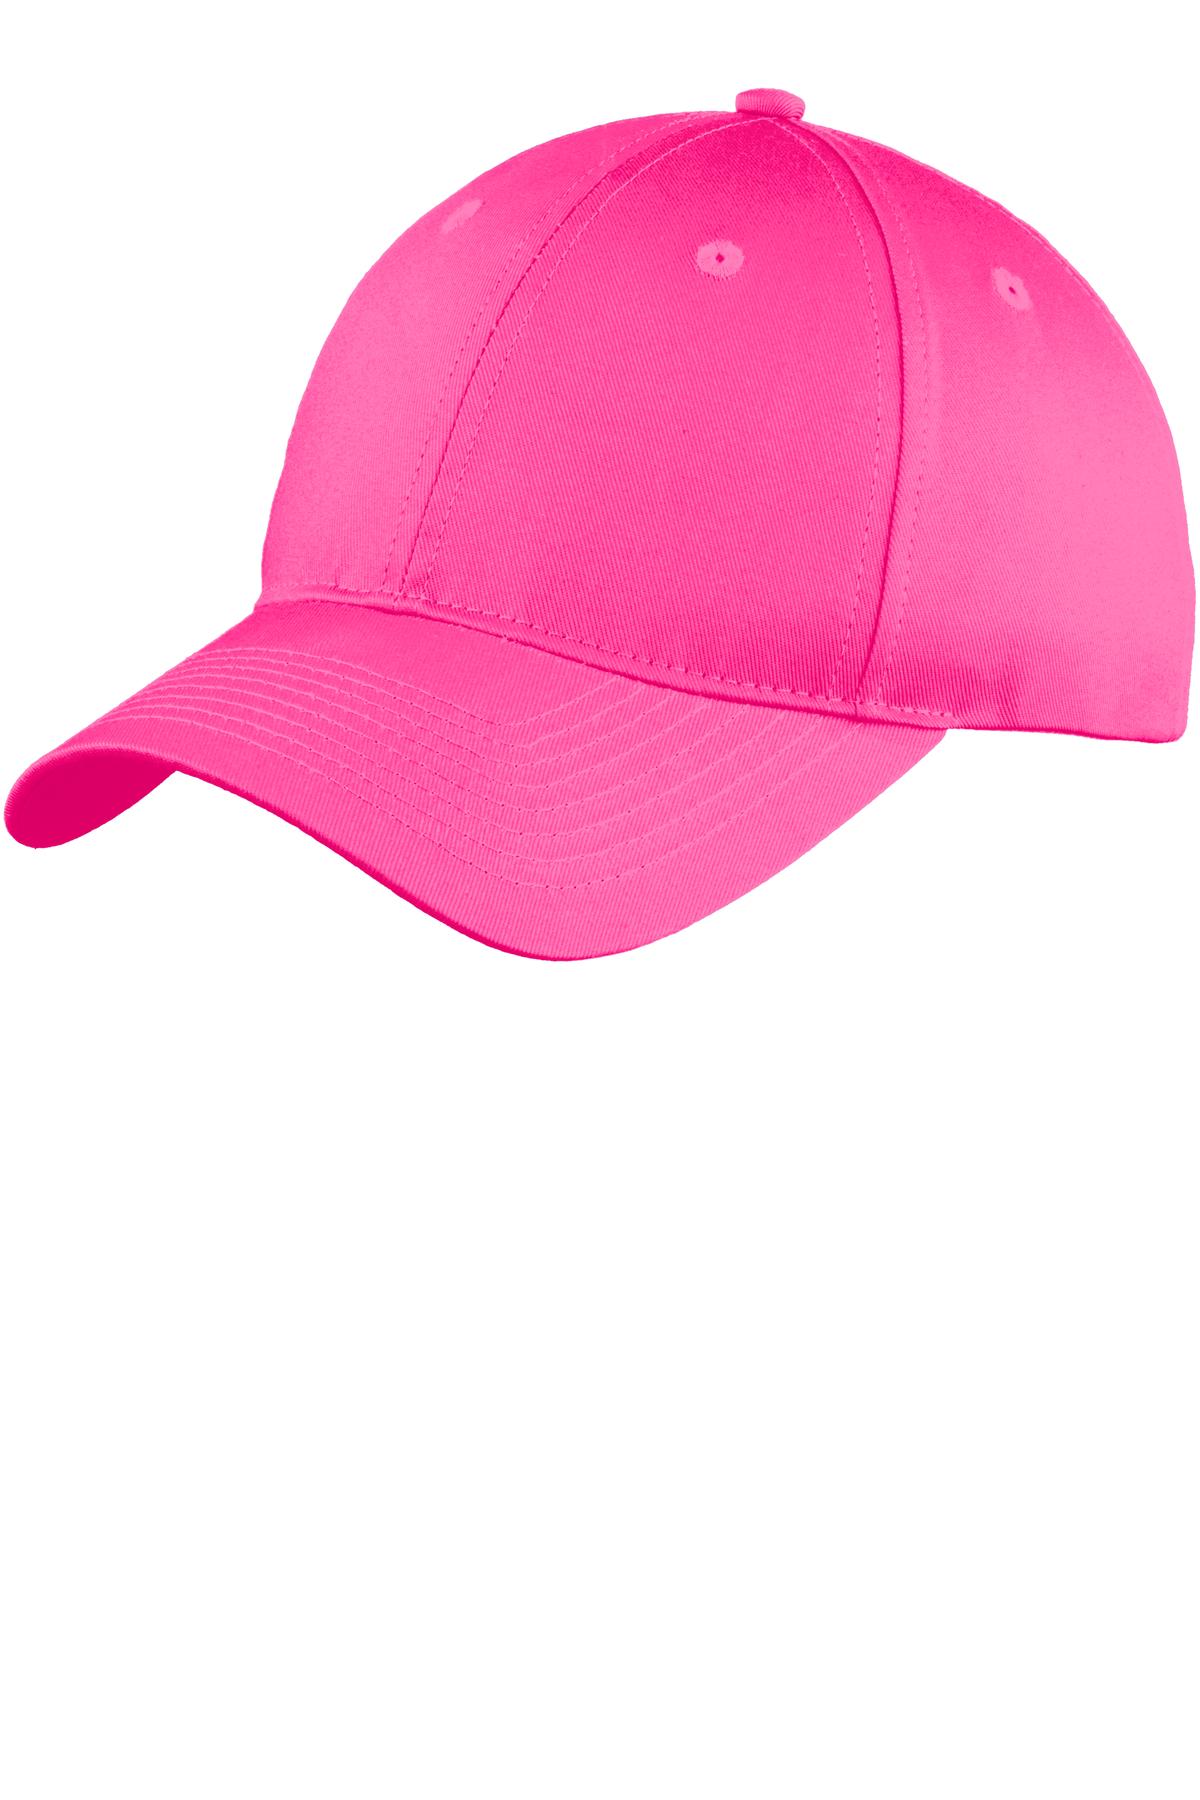 PINK Promo - Port and Company Youth Six-Panel UnstructuredTwill Cap. YC914